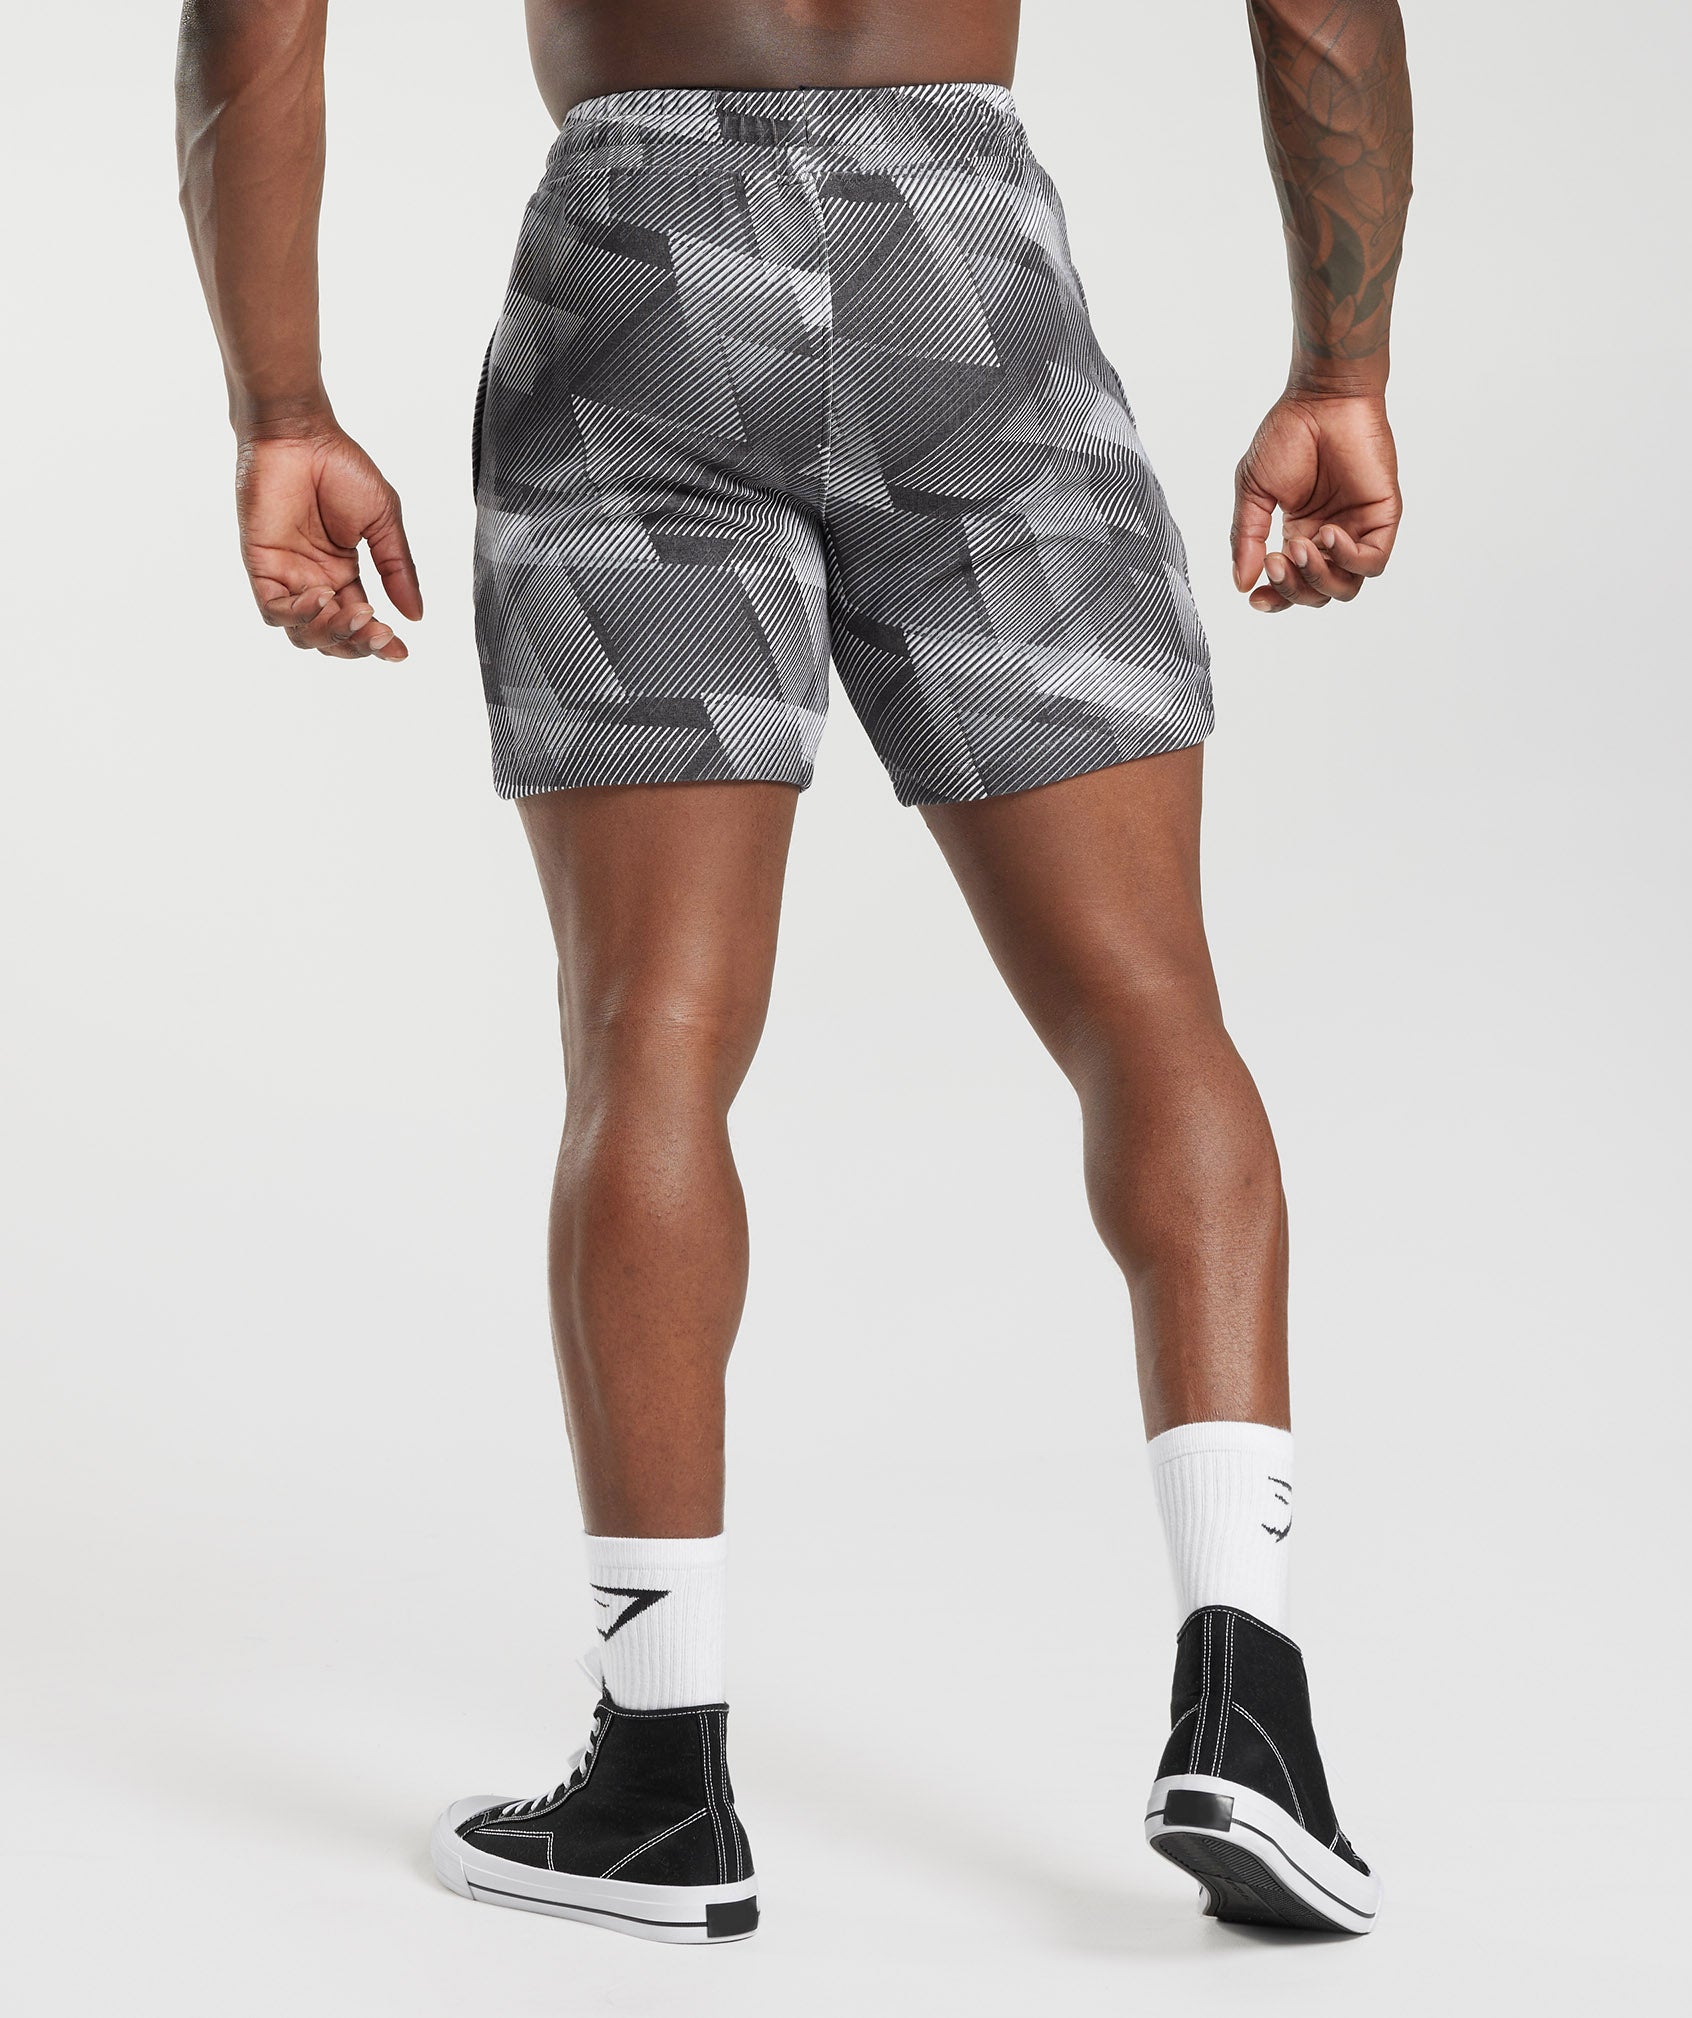 React 7" Shorts in Silhouette Grey - view 2